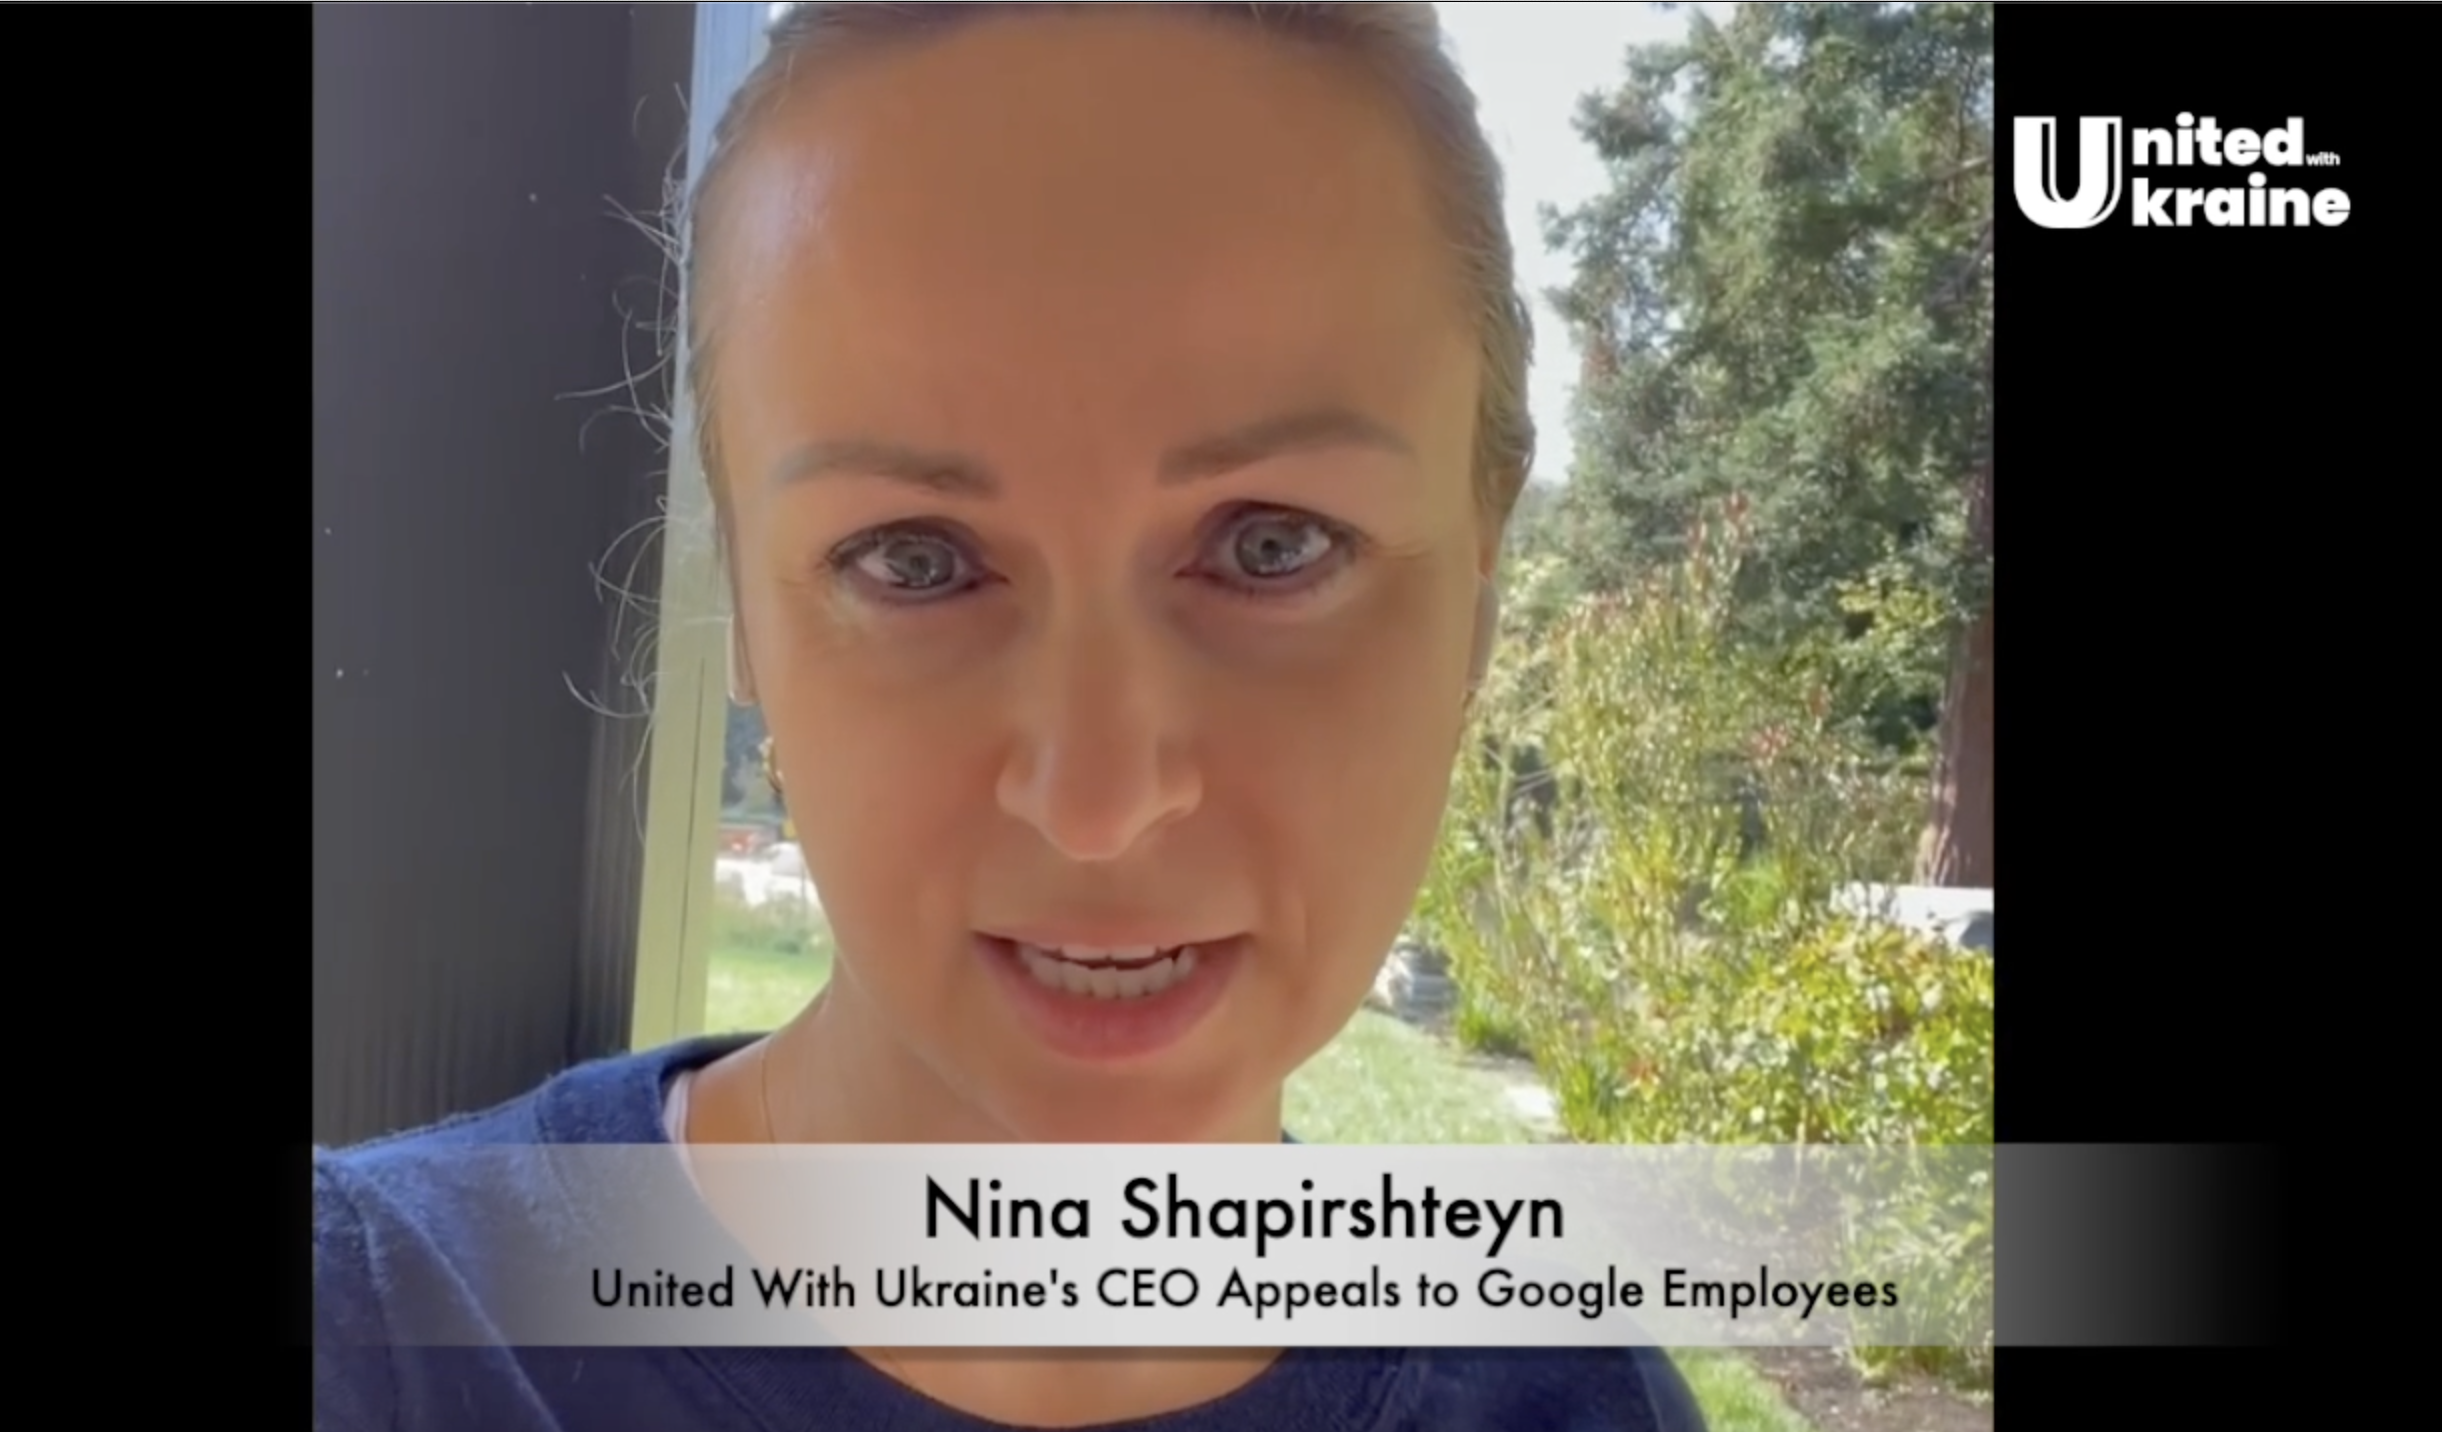 Our CEO Nina Shapirshteyn appeals to Google employees to help collect funds for Ukraine. Watch the video appeal and read the letter from our CEO